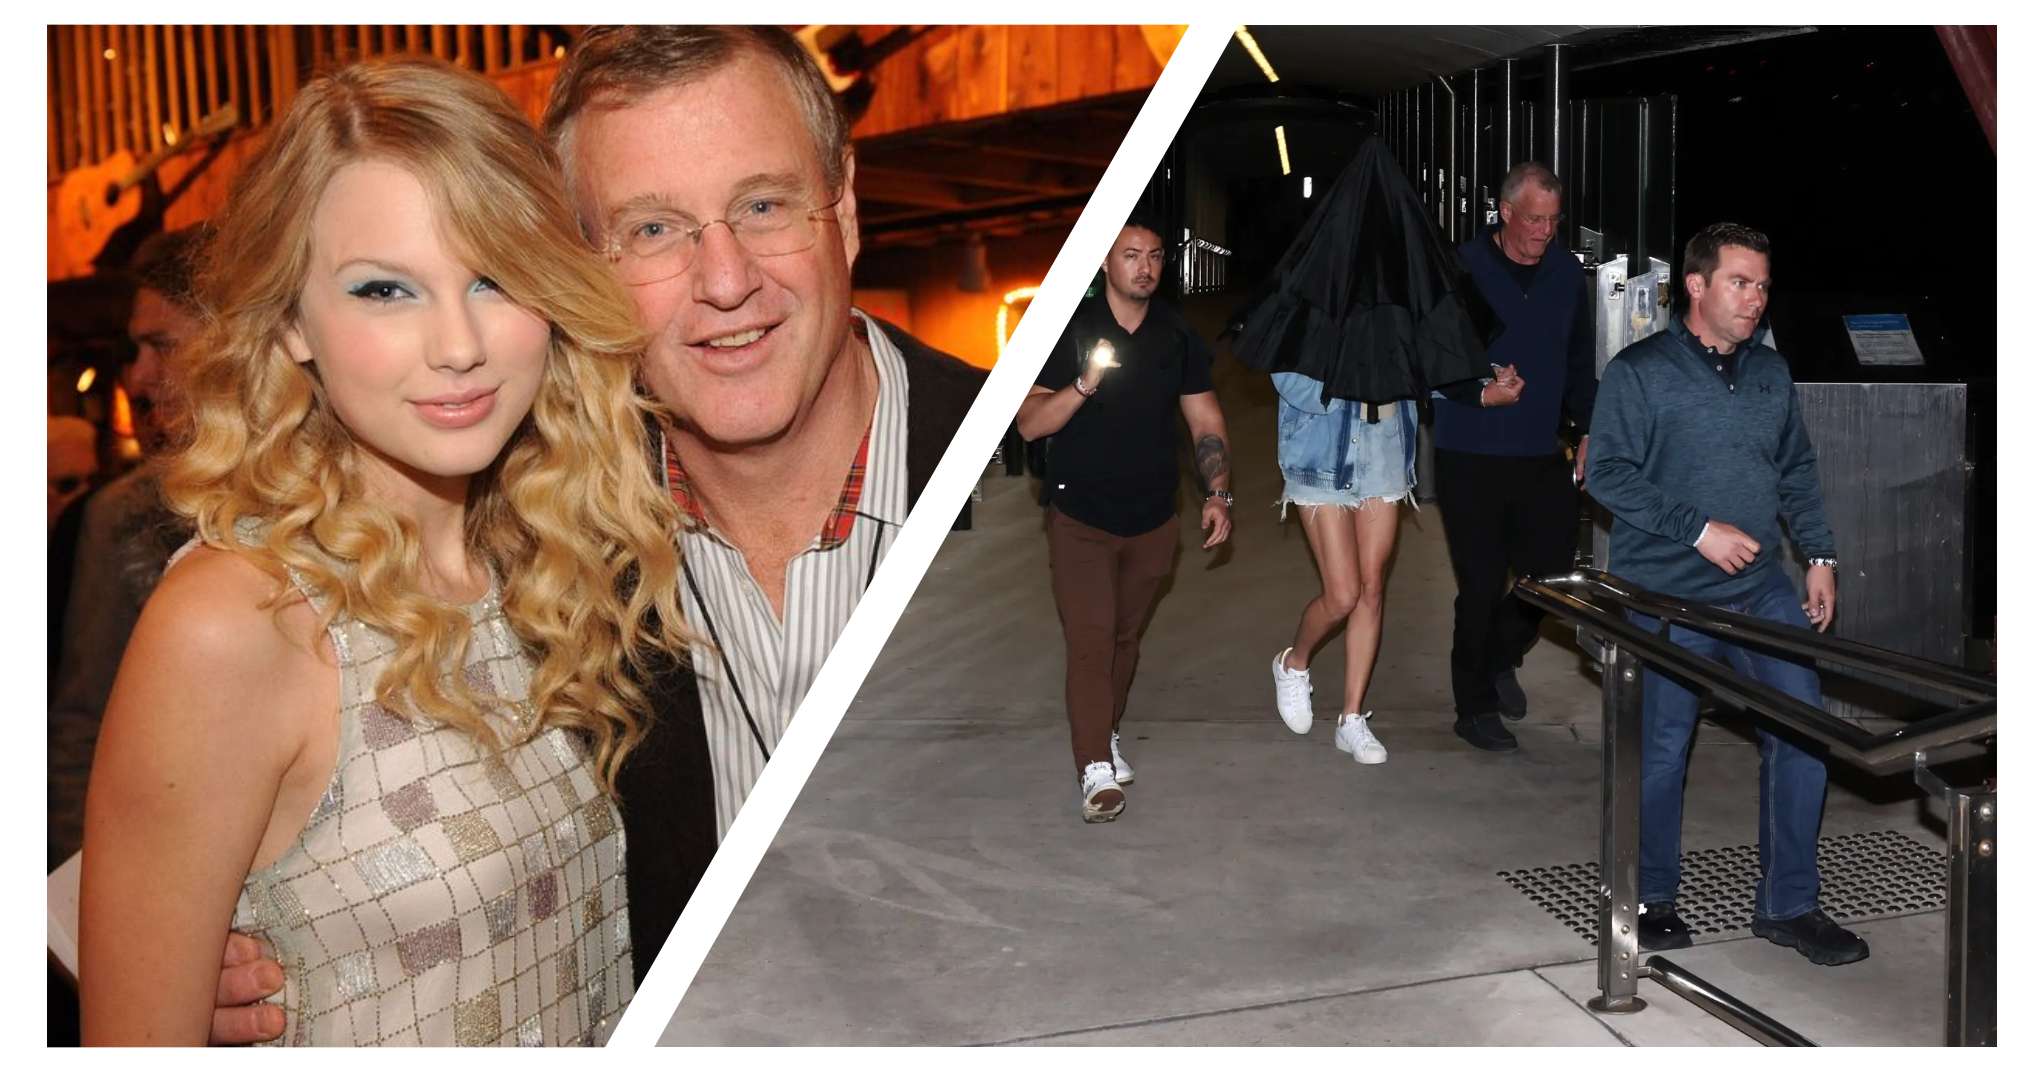 Taylor Swift’s dad accused of slugging photographer in Australia